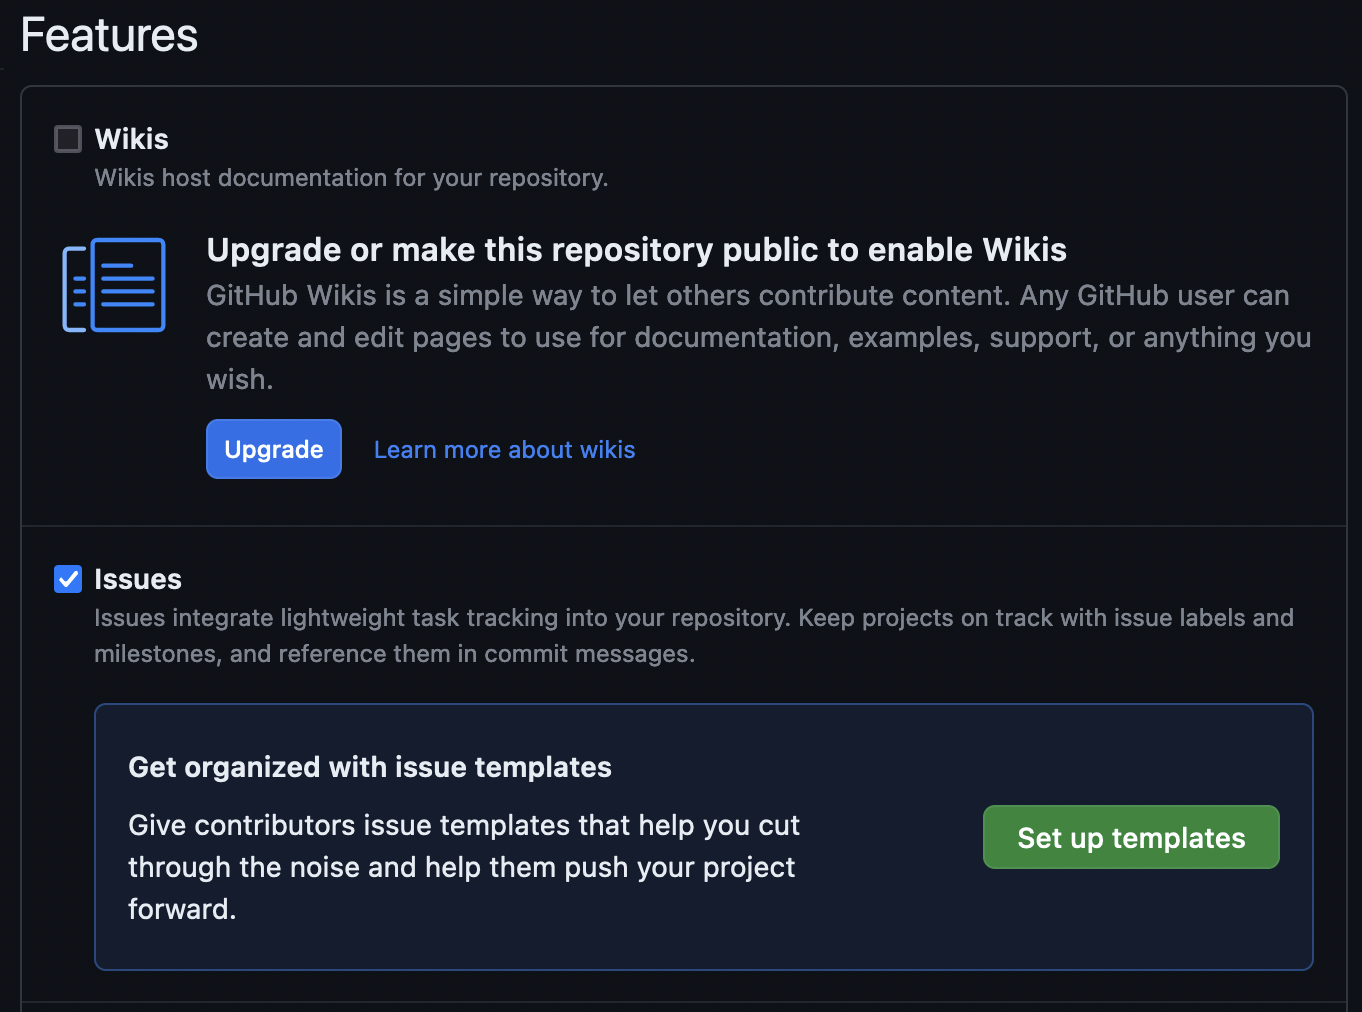 GitHub settings features section, set up templates button